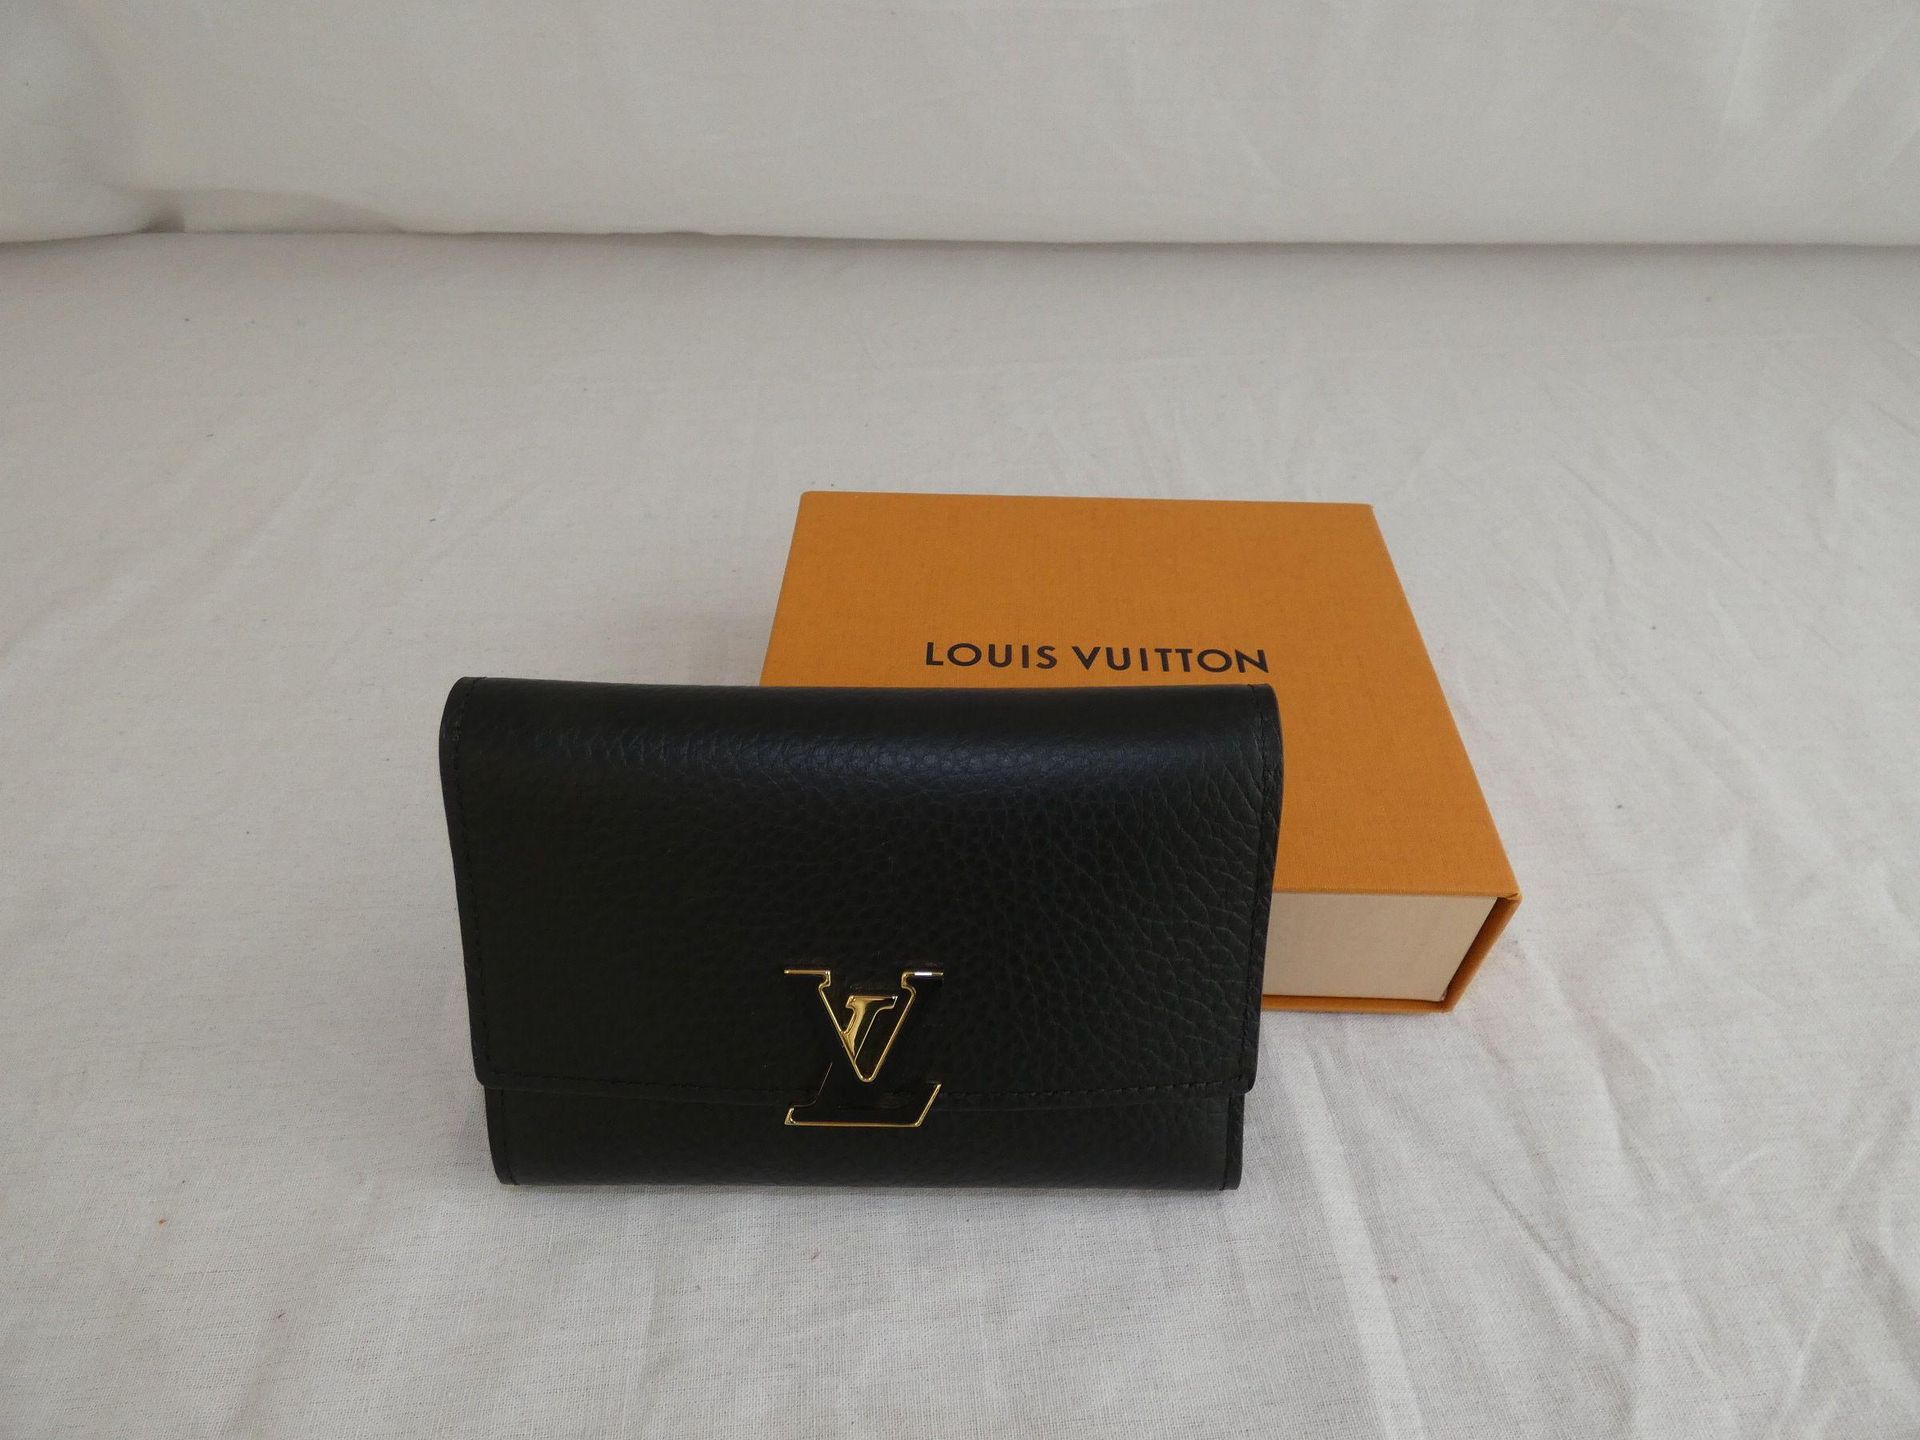 Louis VUITTON year 2019 Compact wallet 'Capucines' in b…